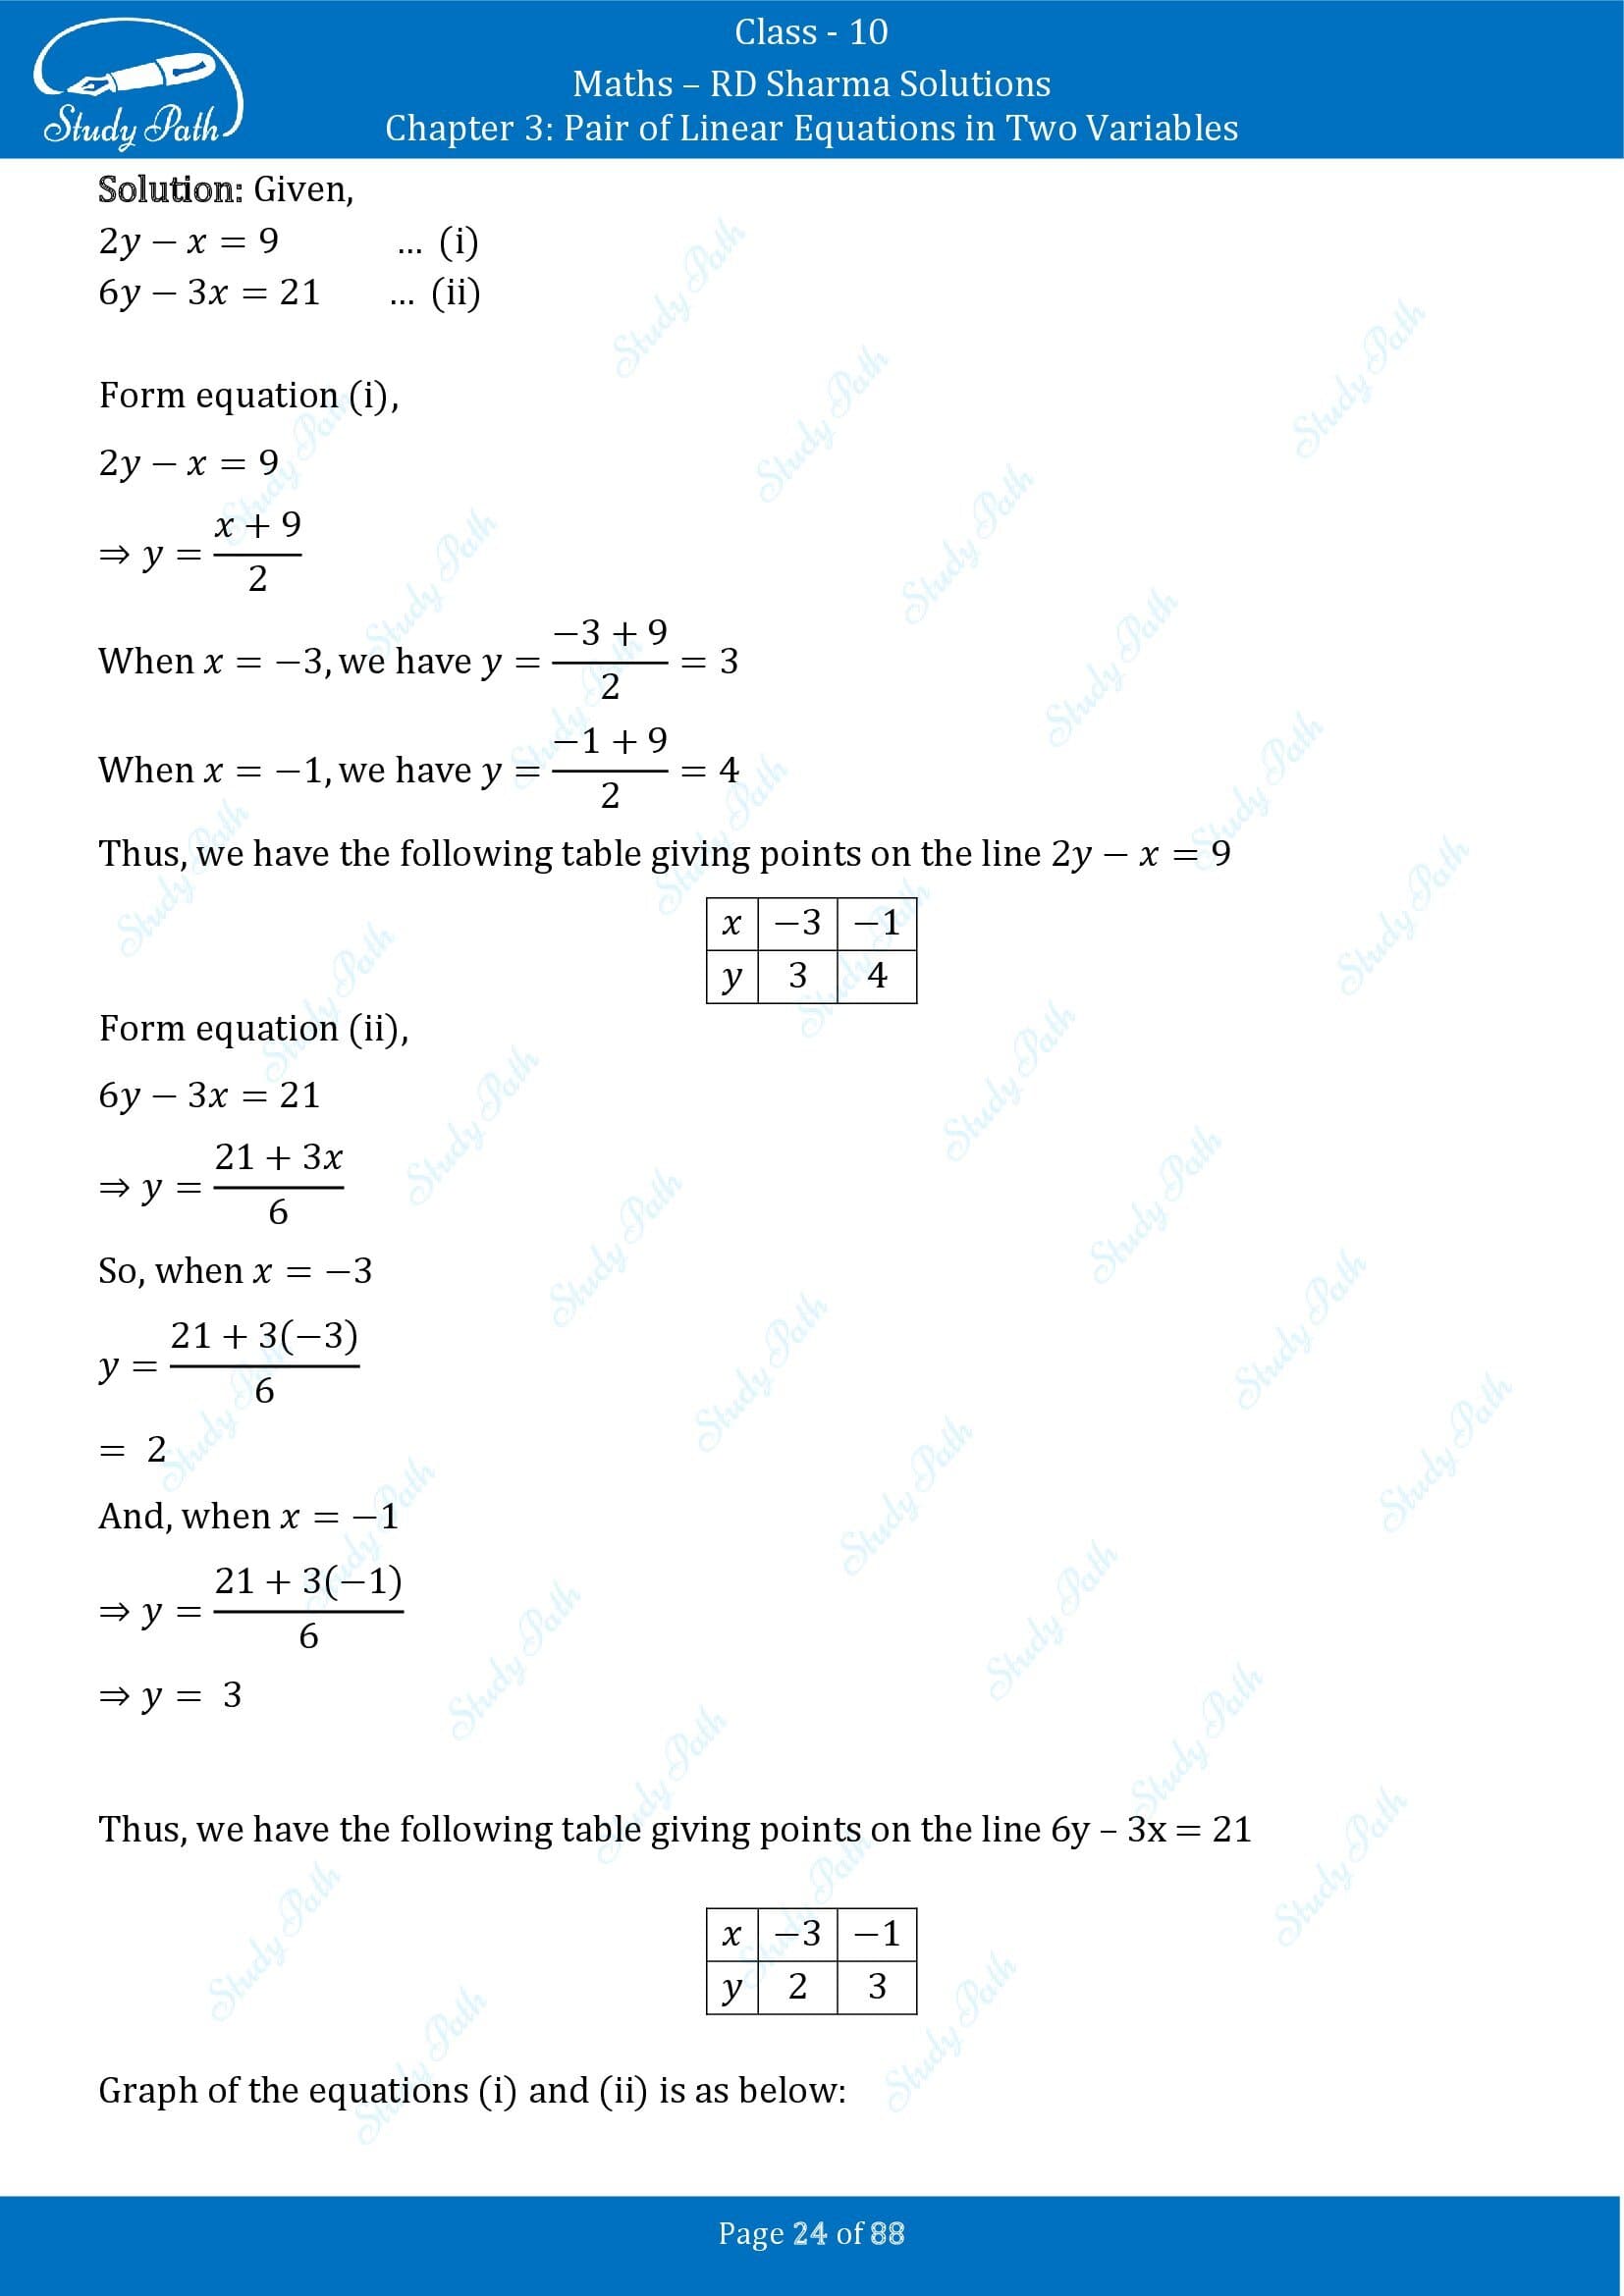 RD Sharma Solutions Class 10 Chapter 3 Pair of Linear Equations in Two Variables Exercise 3.2 00024